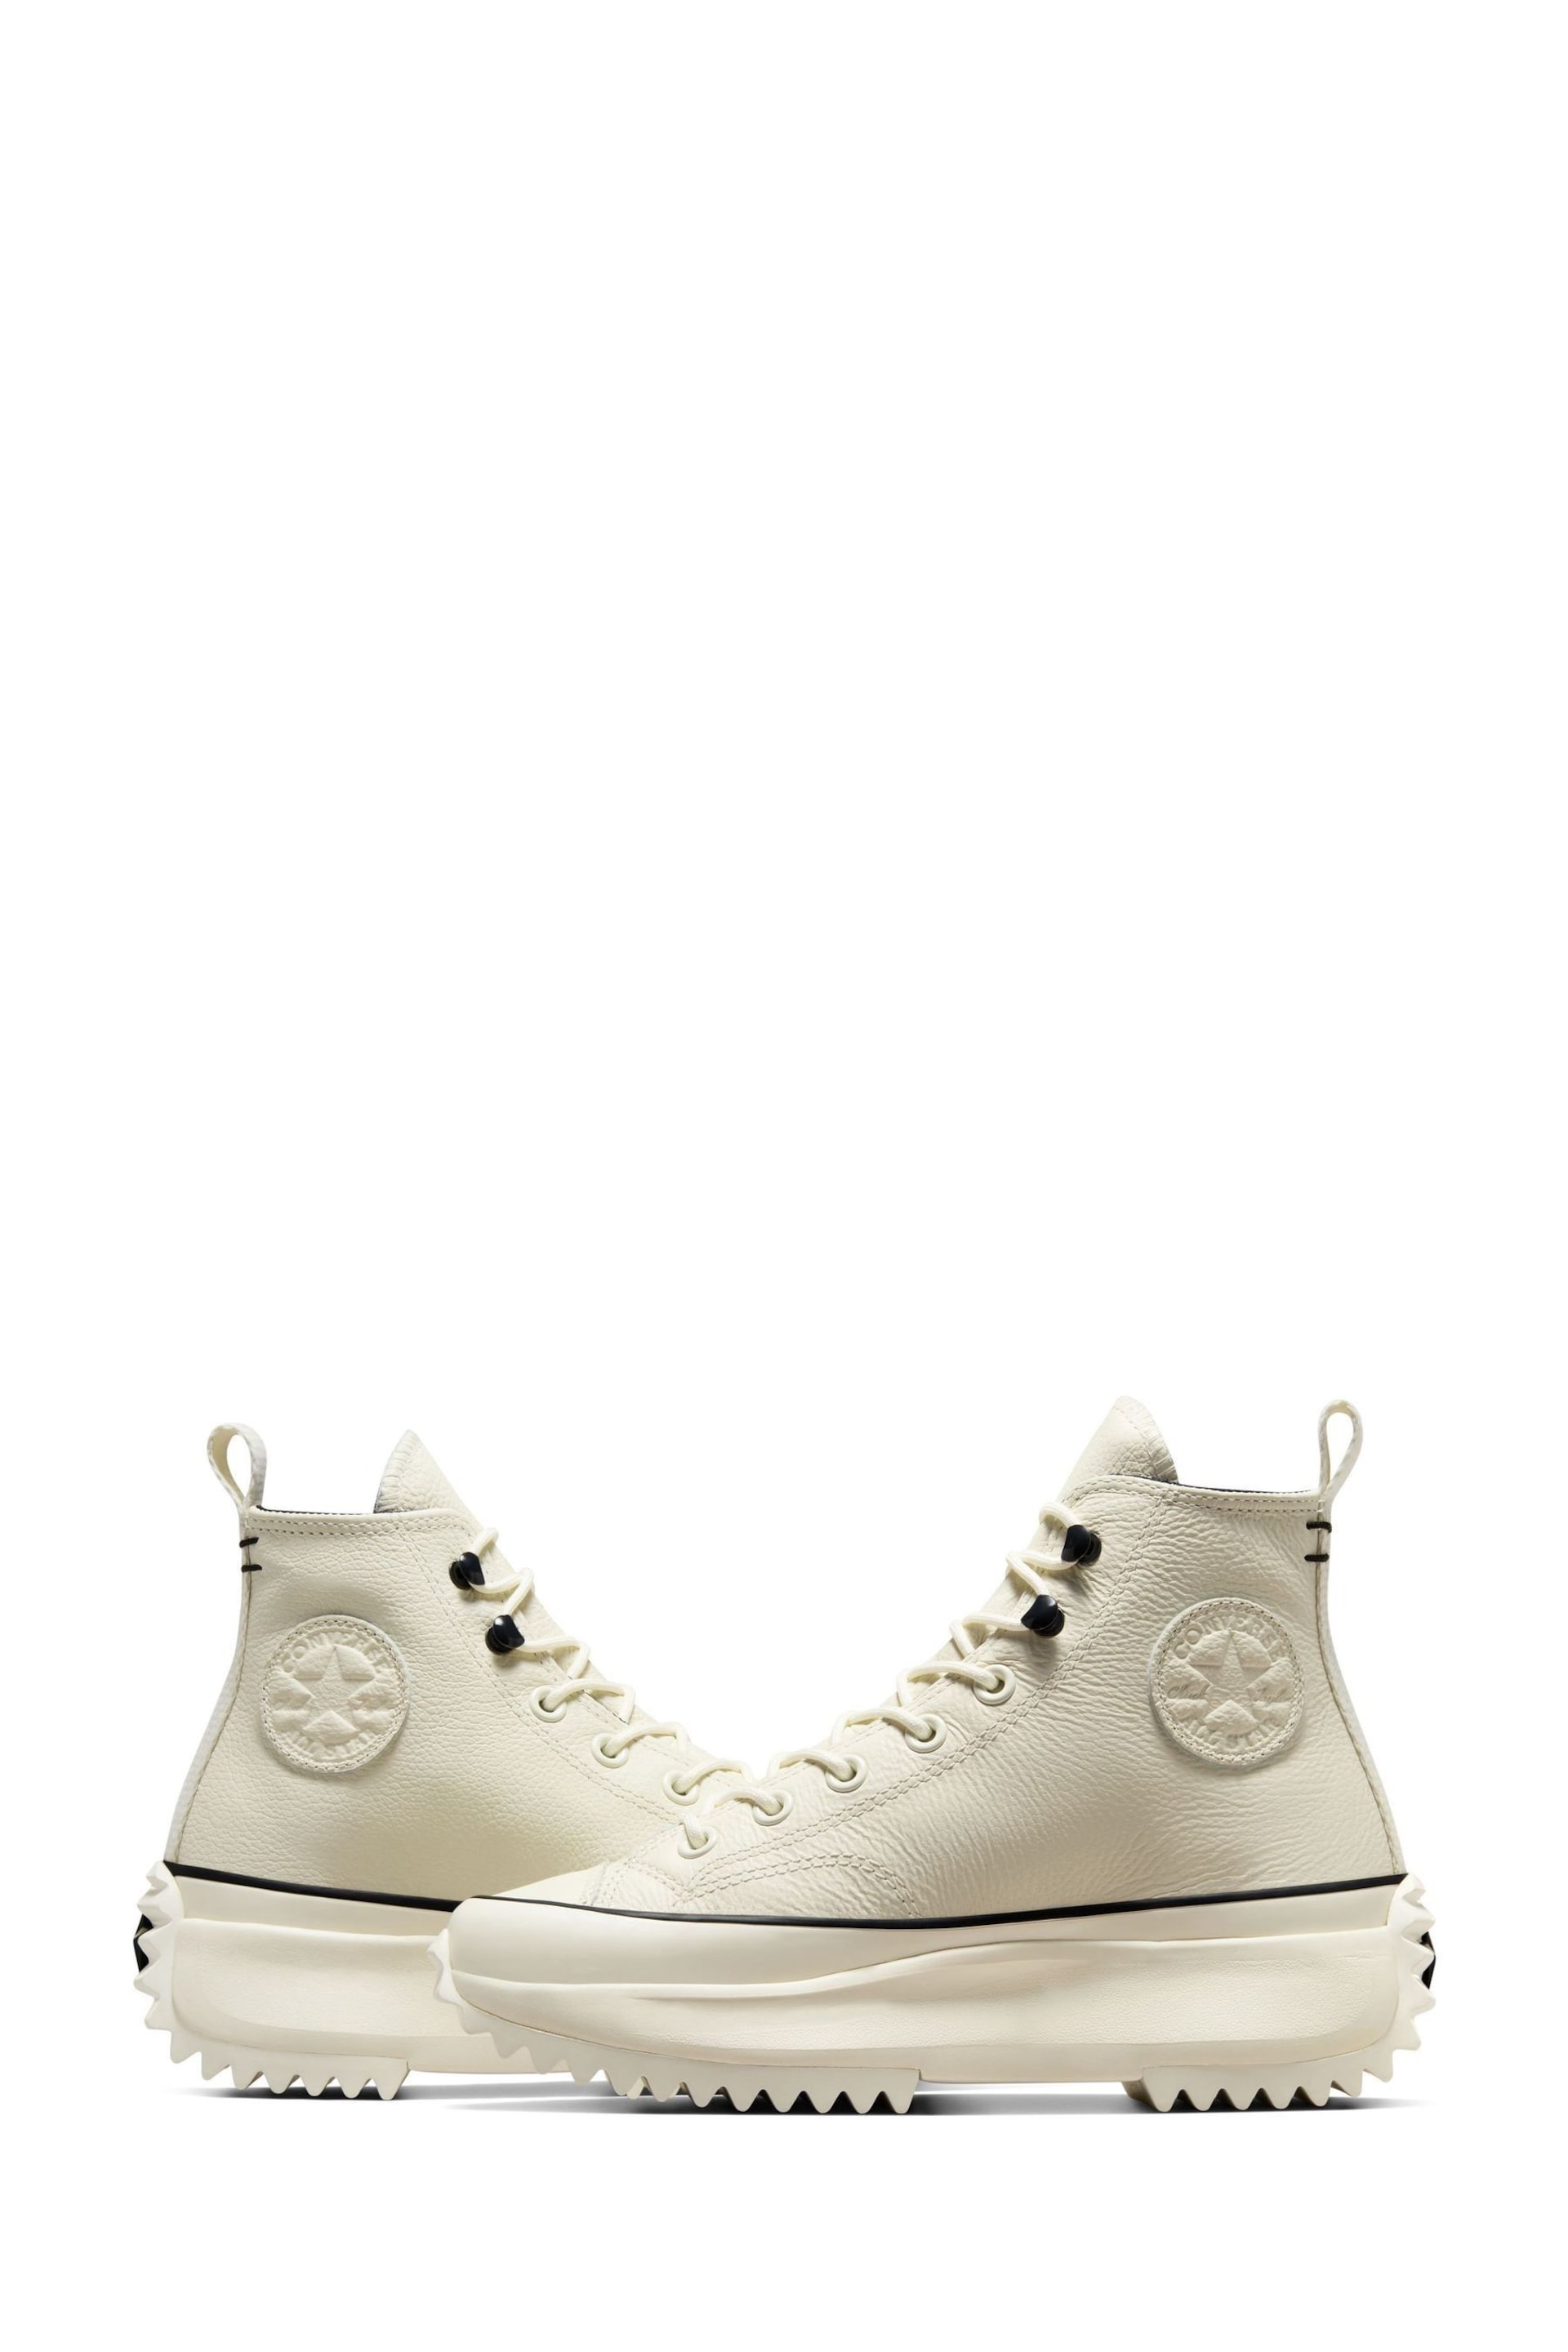 Converse Cream Leather Run Star Hike Trainers - Image 8 of 10